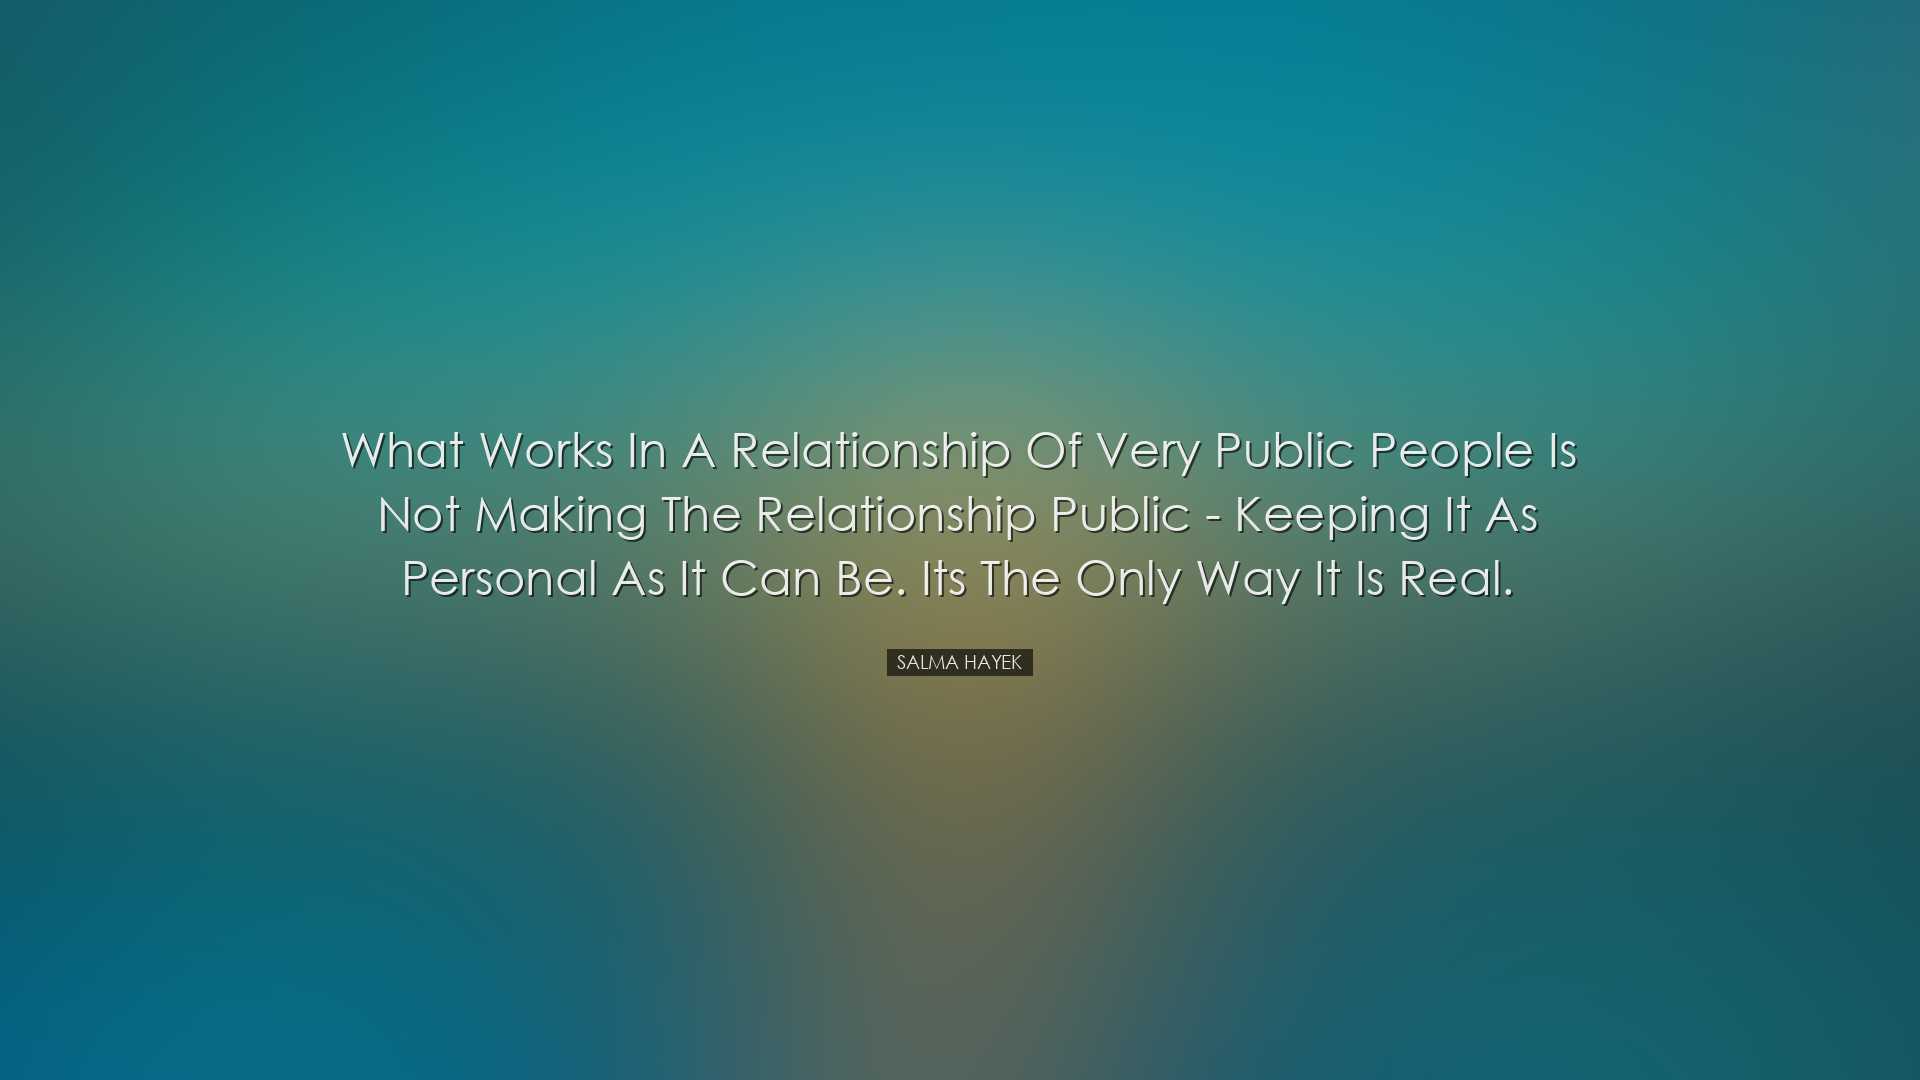 What works in a relationship of very public people is not making t